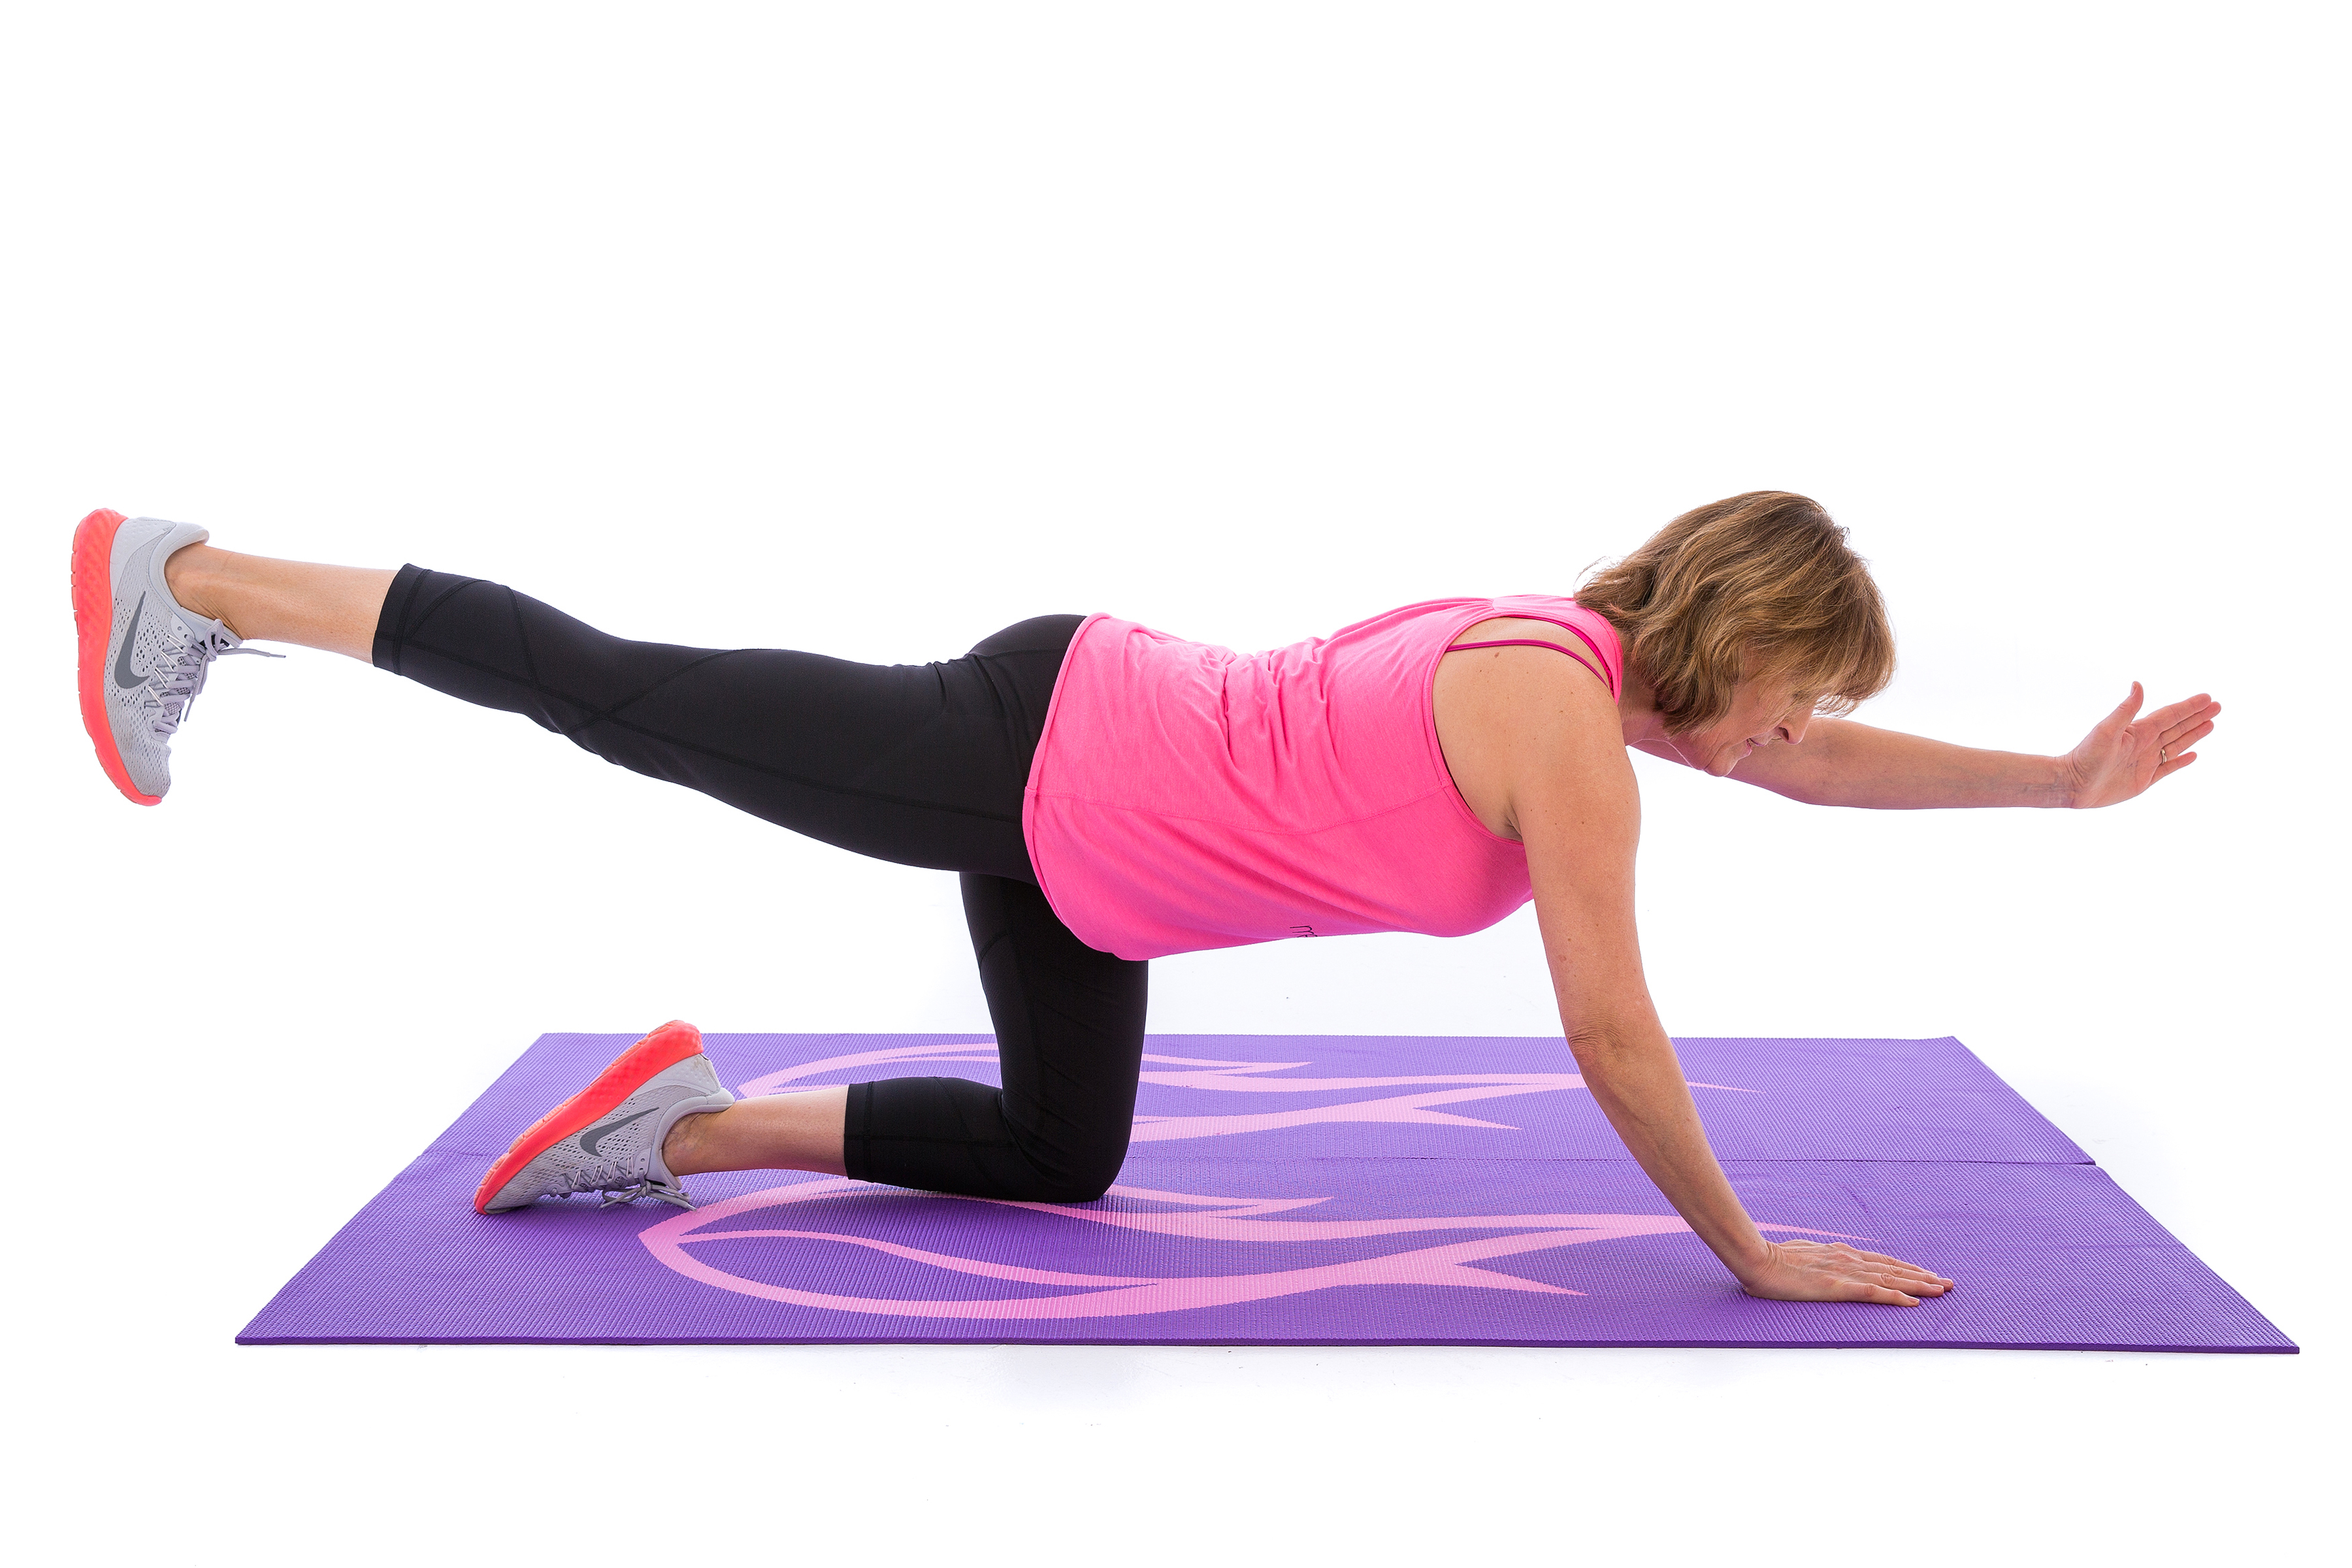 The 10-Minute Workout That Will Help Beat Symptoms Of The Menopause